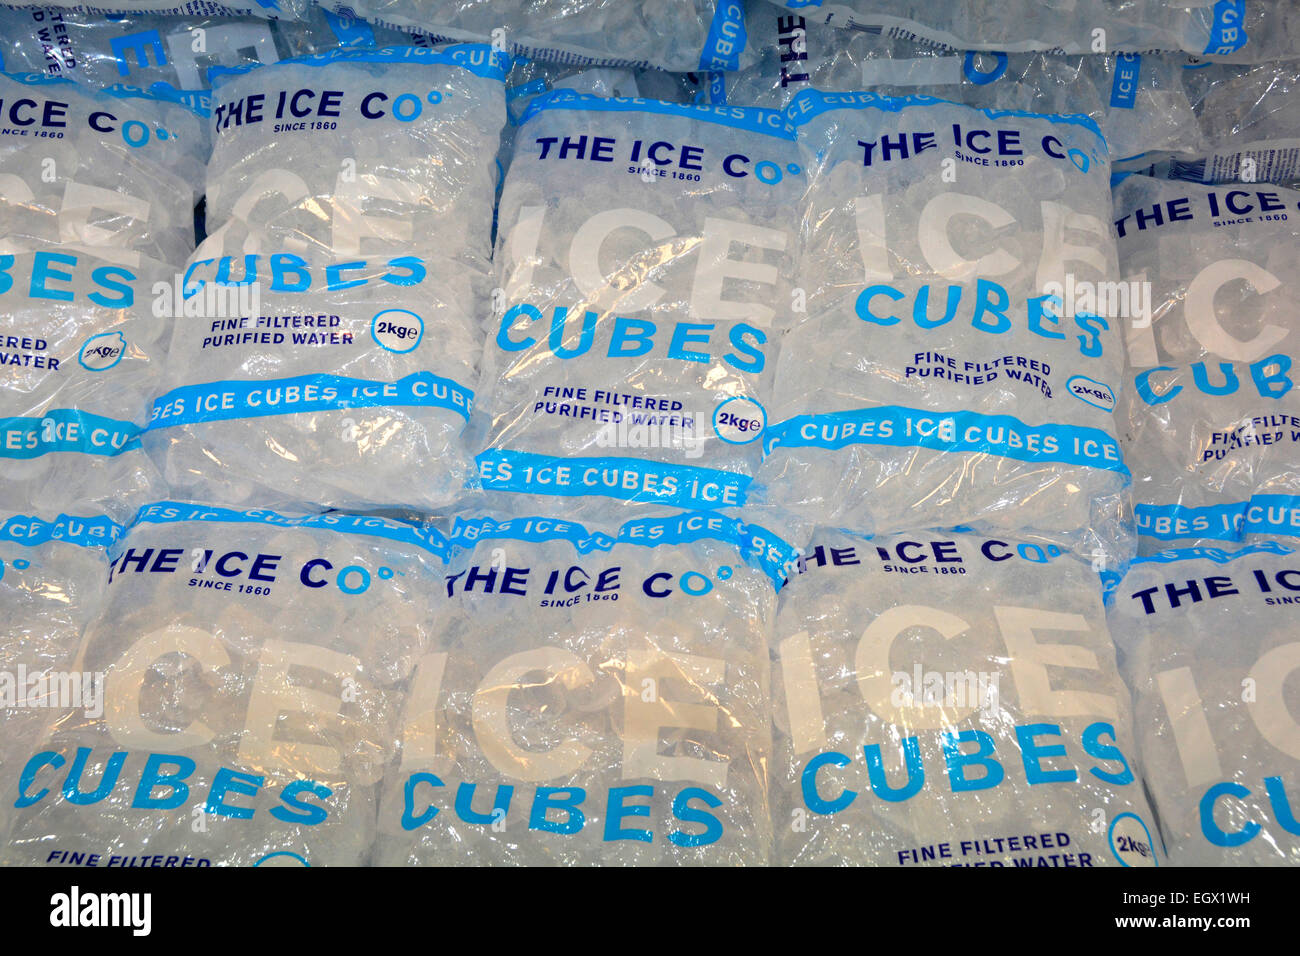 Plastic bags of fine filtered purified frozen water ice cubes in cold ...